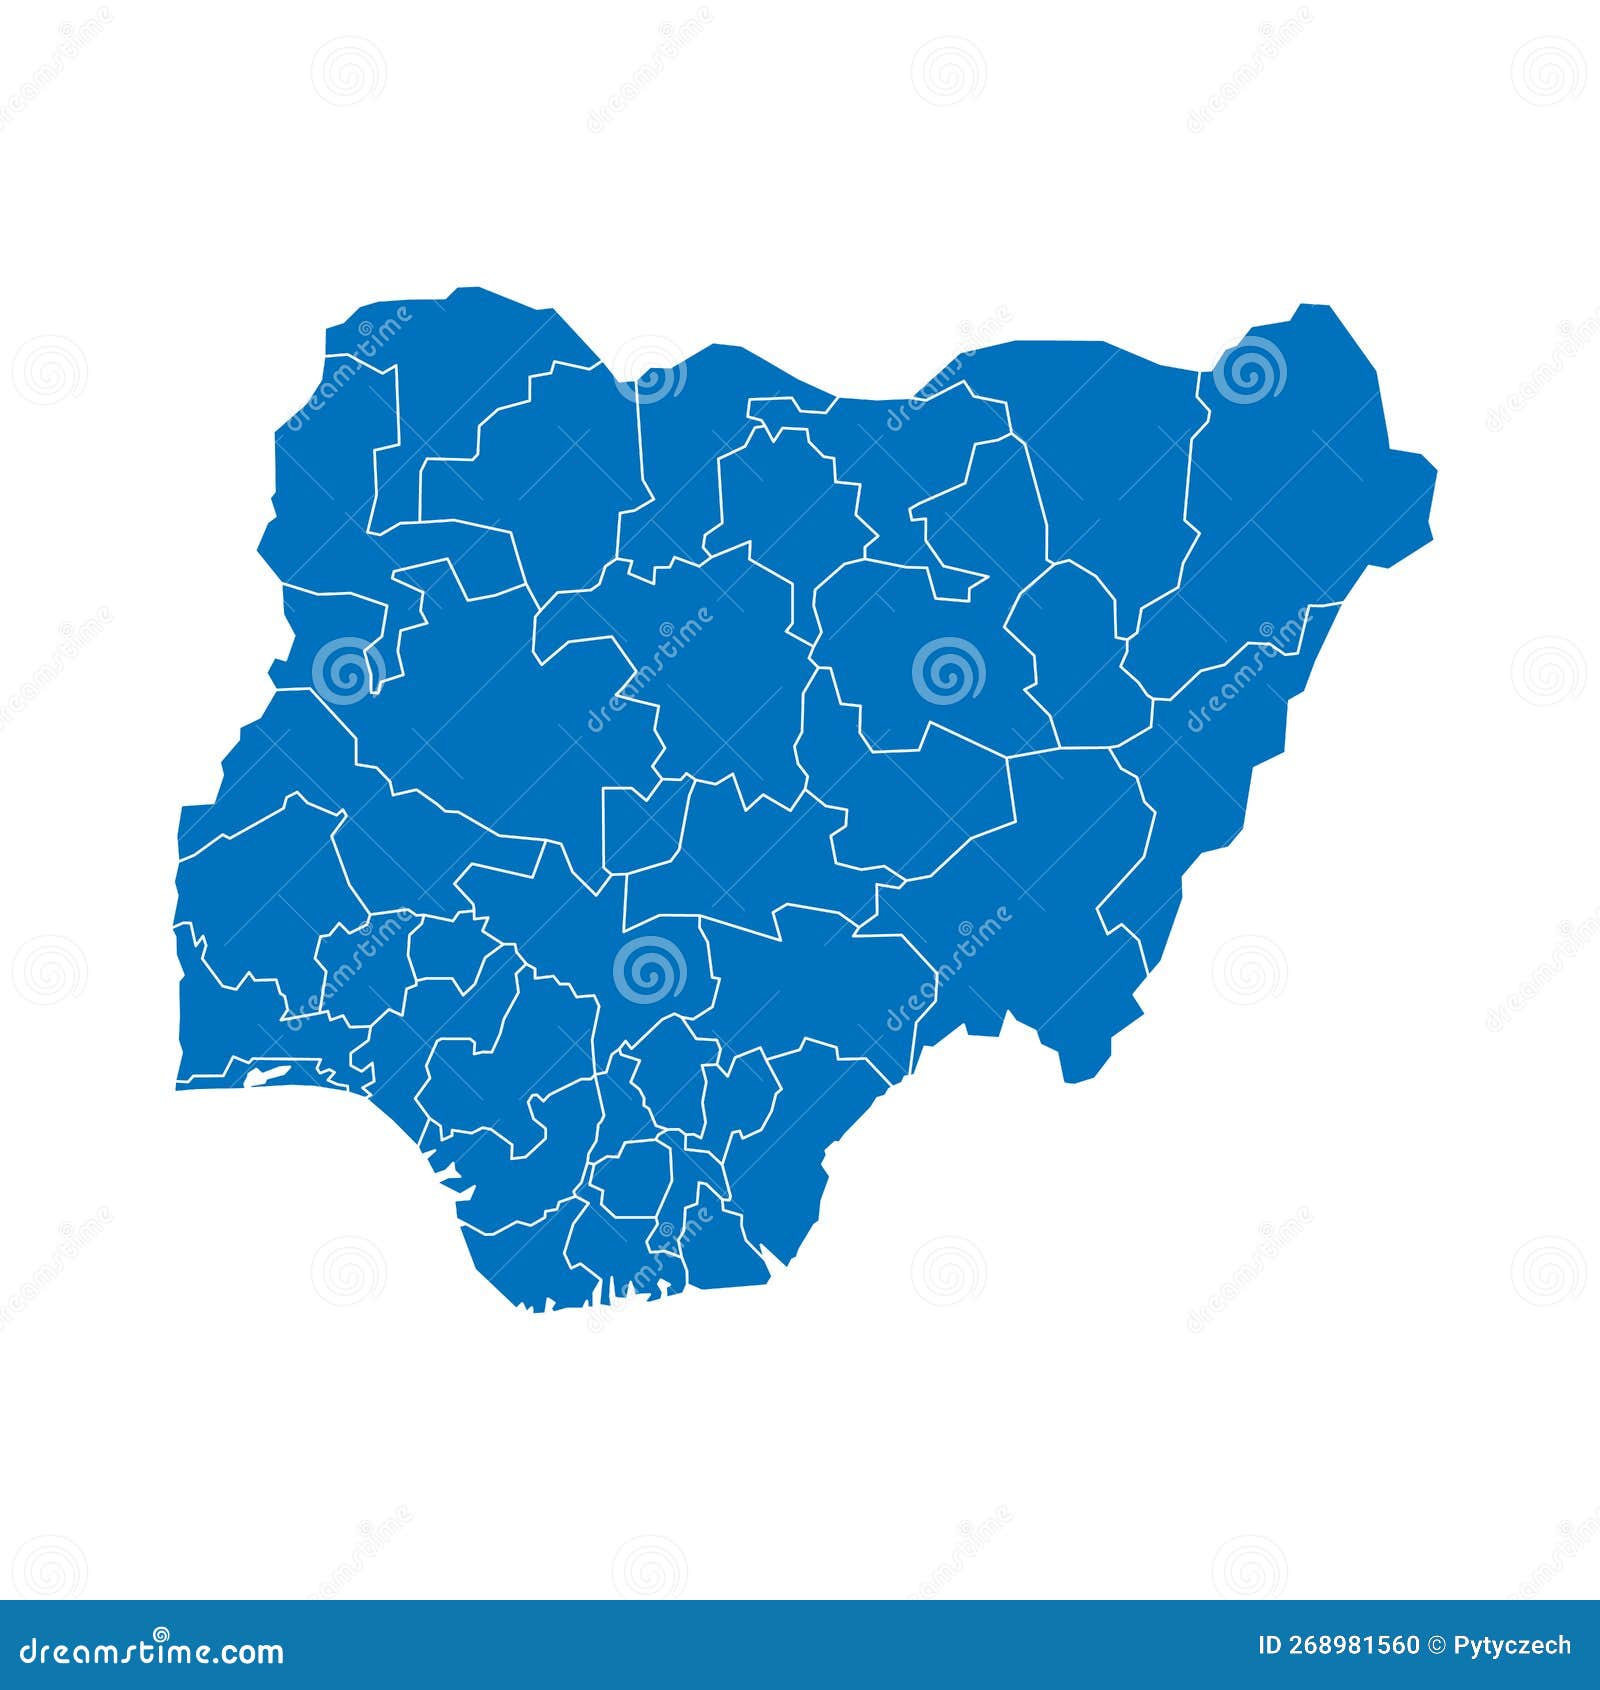 Nigeria Political Map Of Administrative Divisions Stock Illustration Illustration Of Land